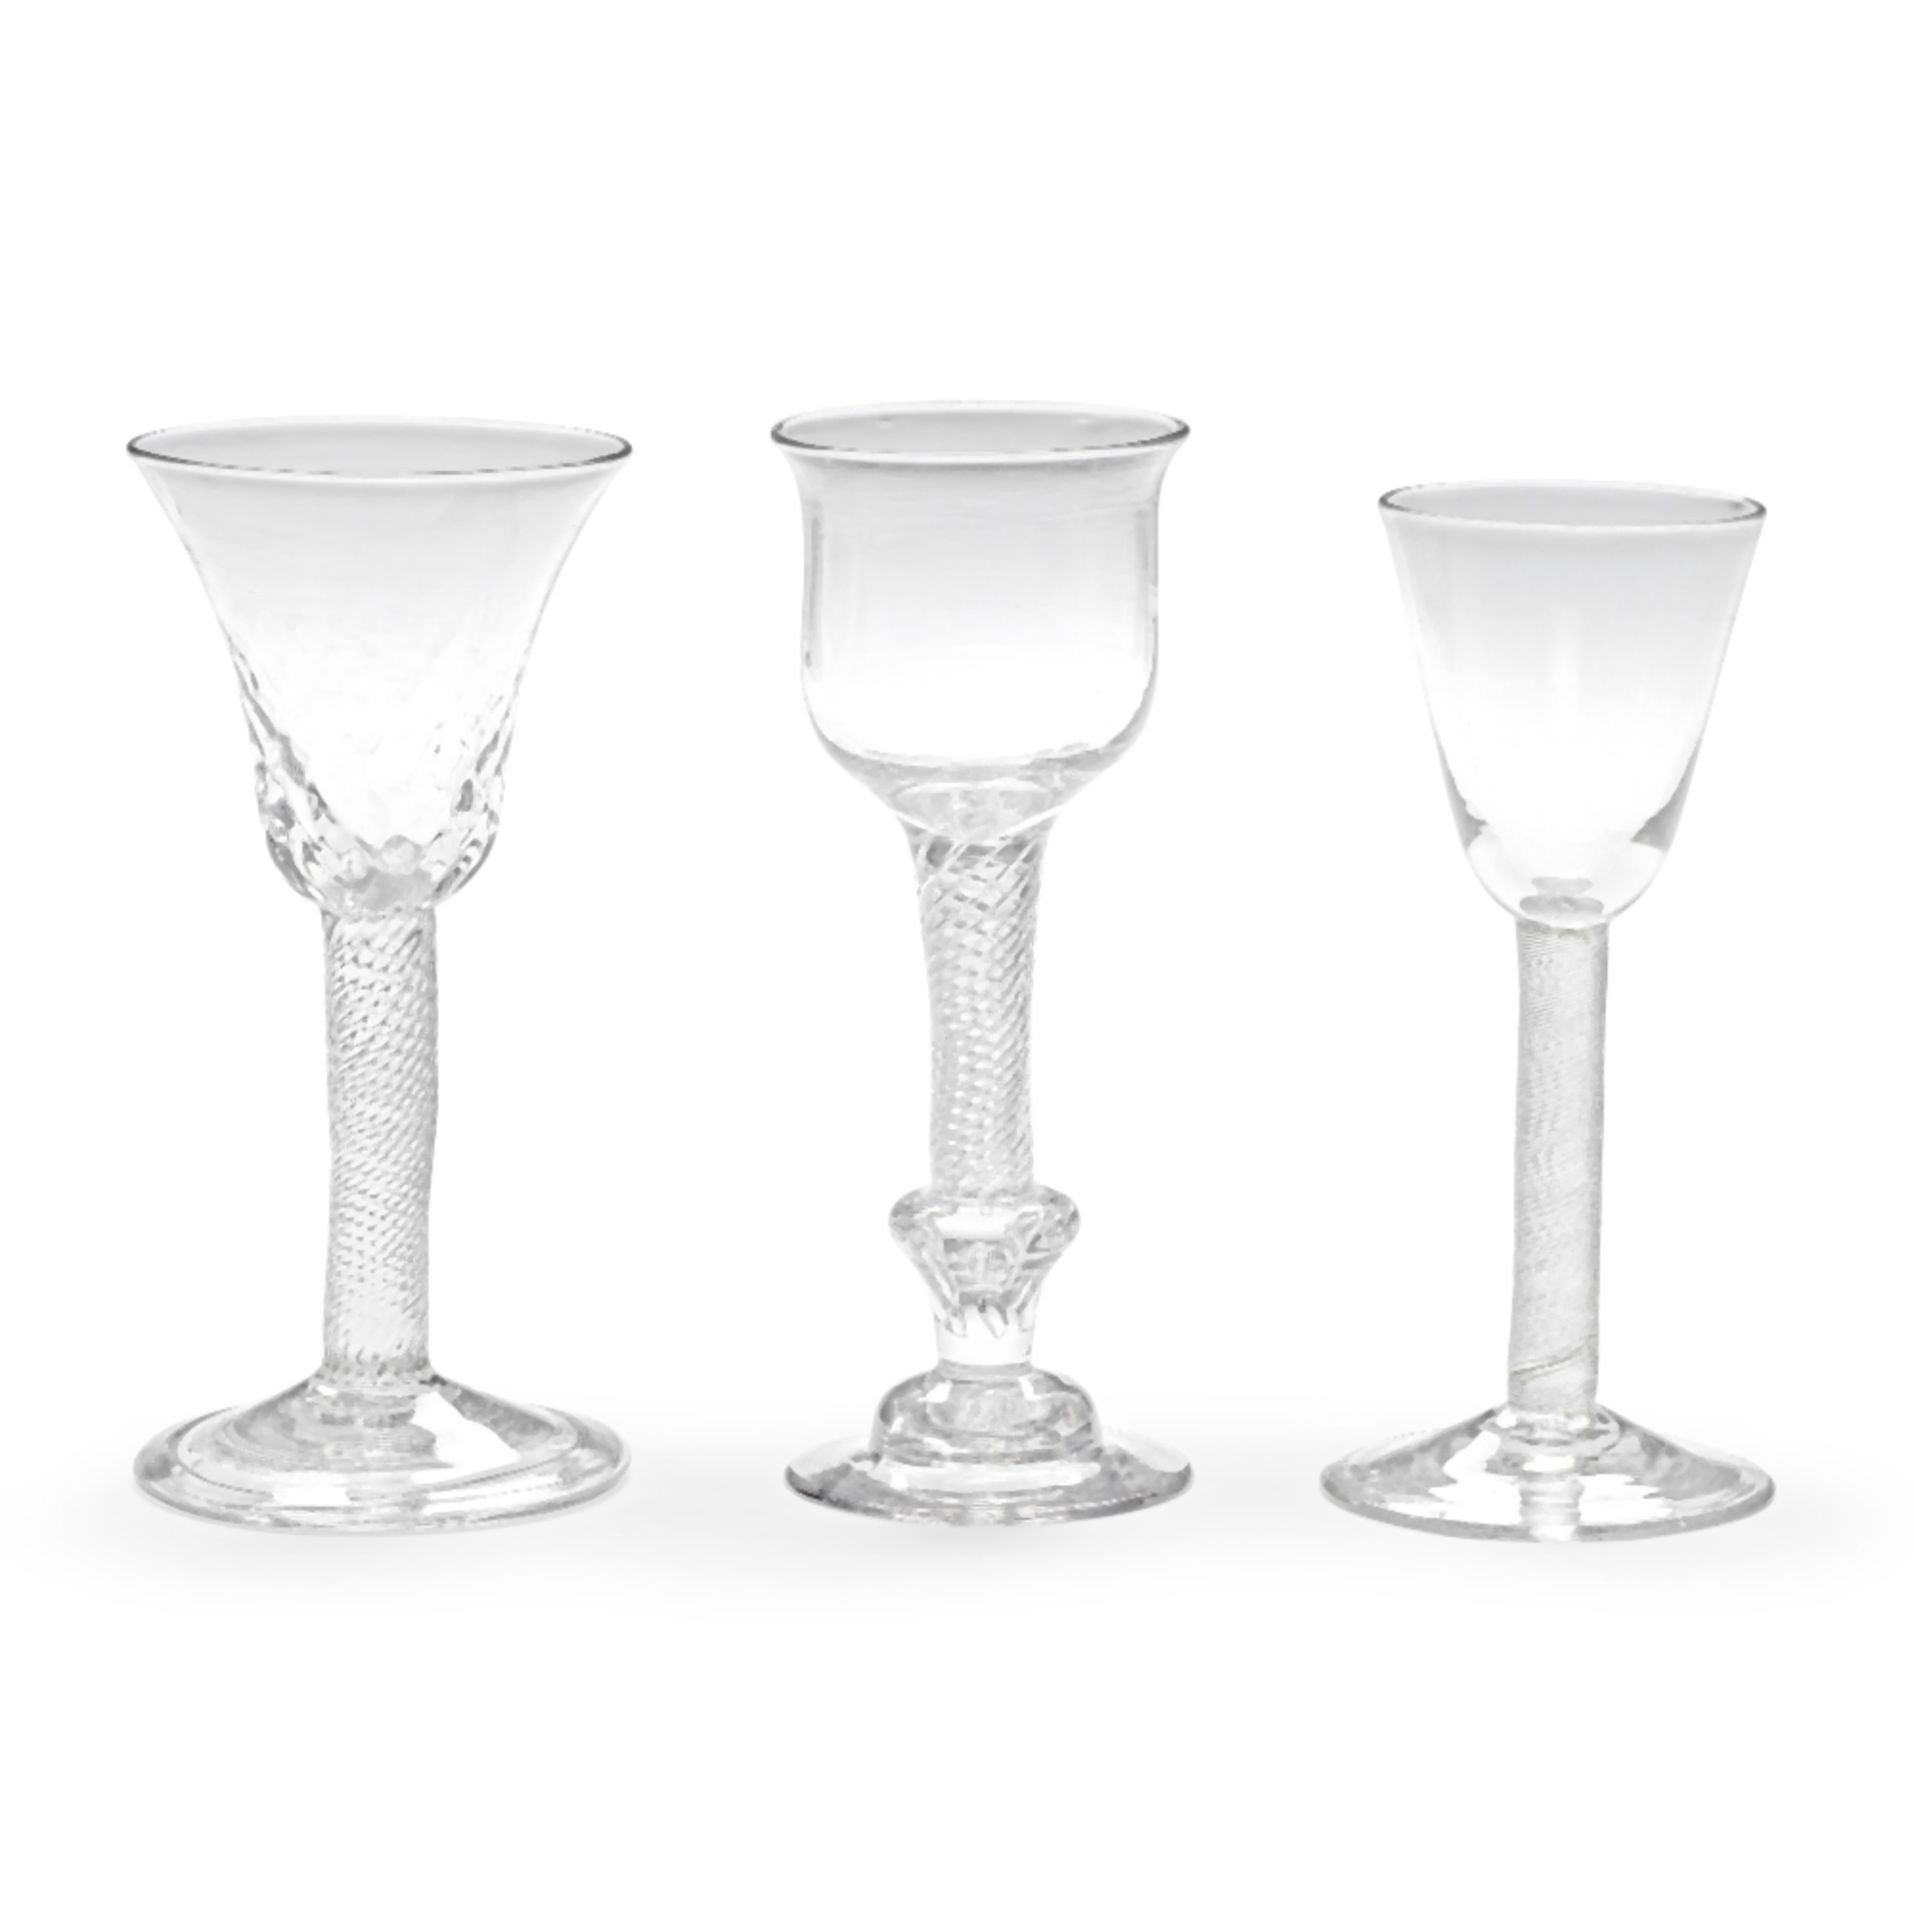 A composite stem wine glass and two incised twist wine glasses, circa 1750-65